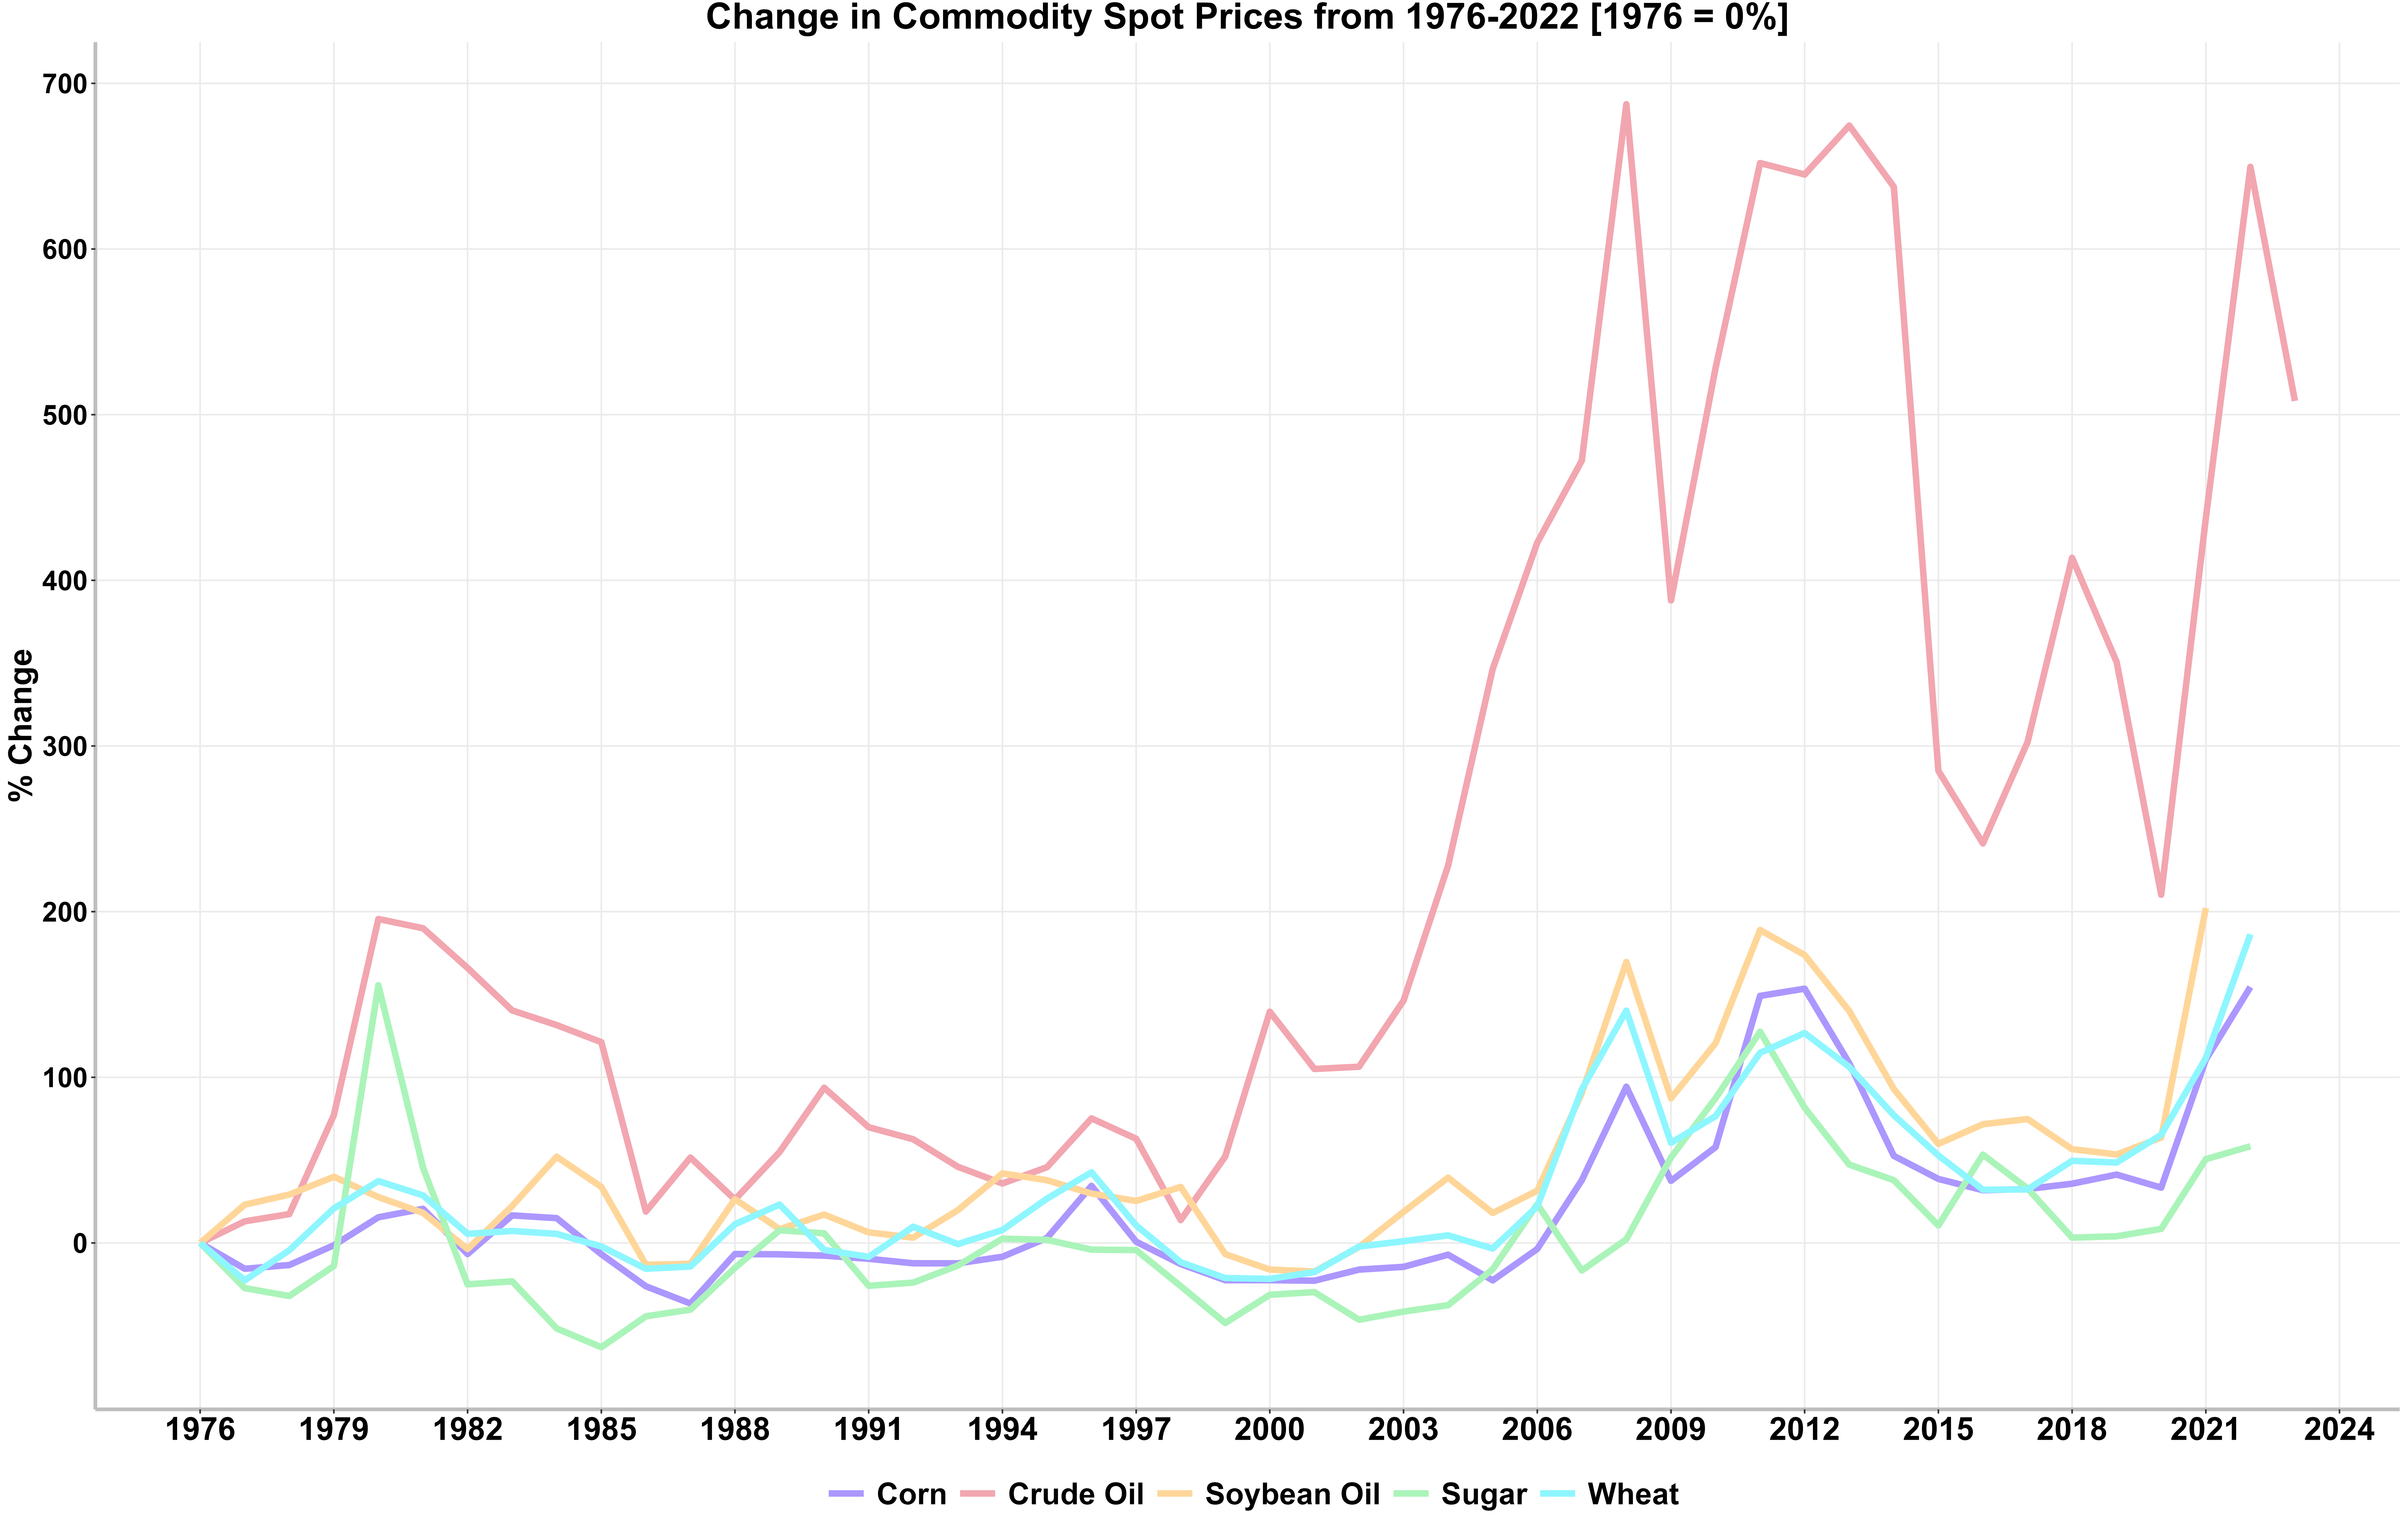 Commodity Spot Price Change in % since 1976